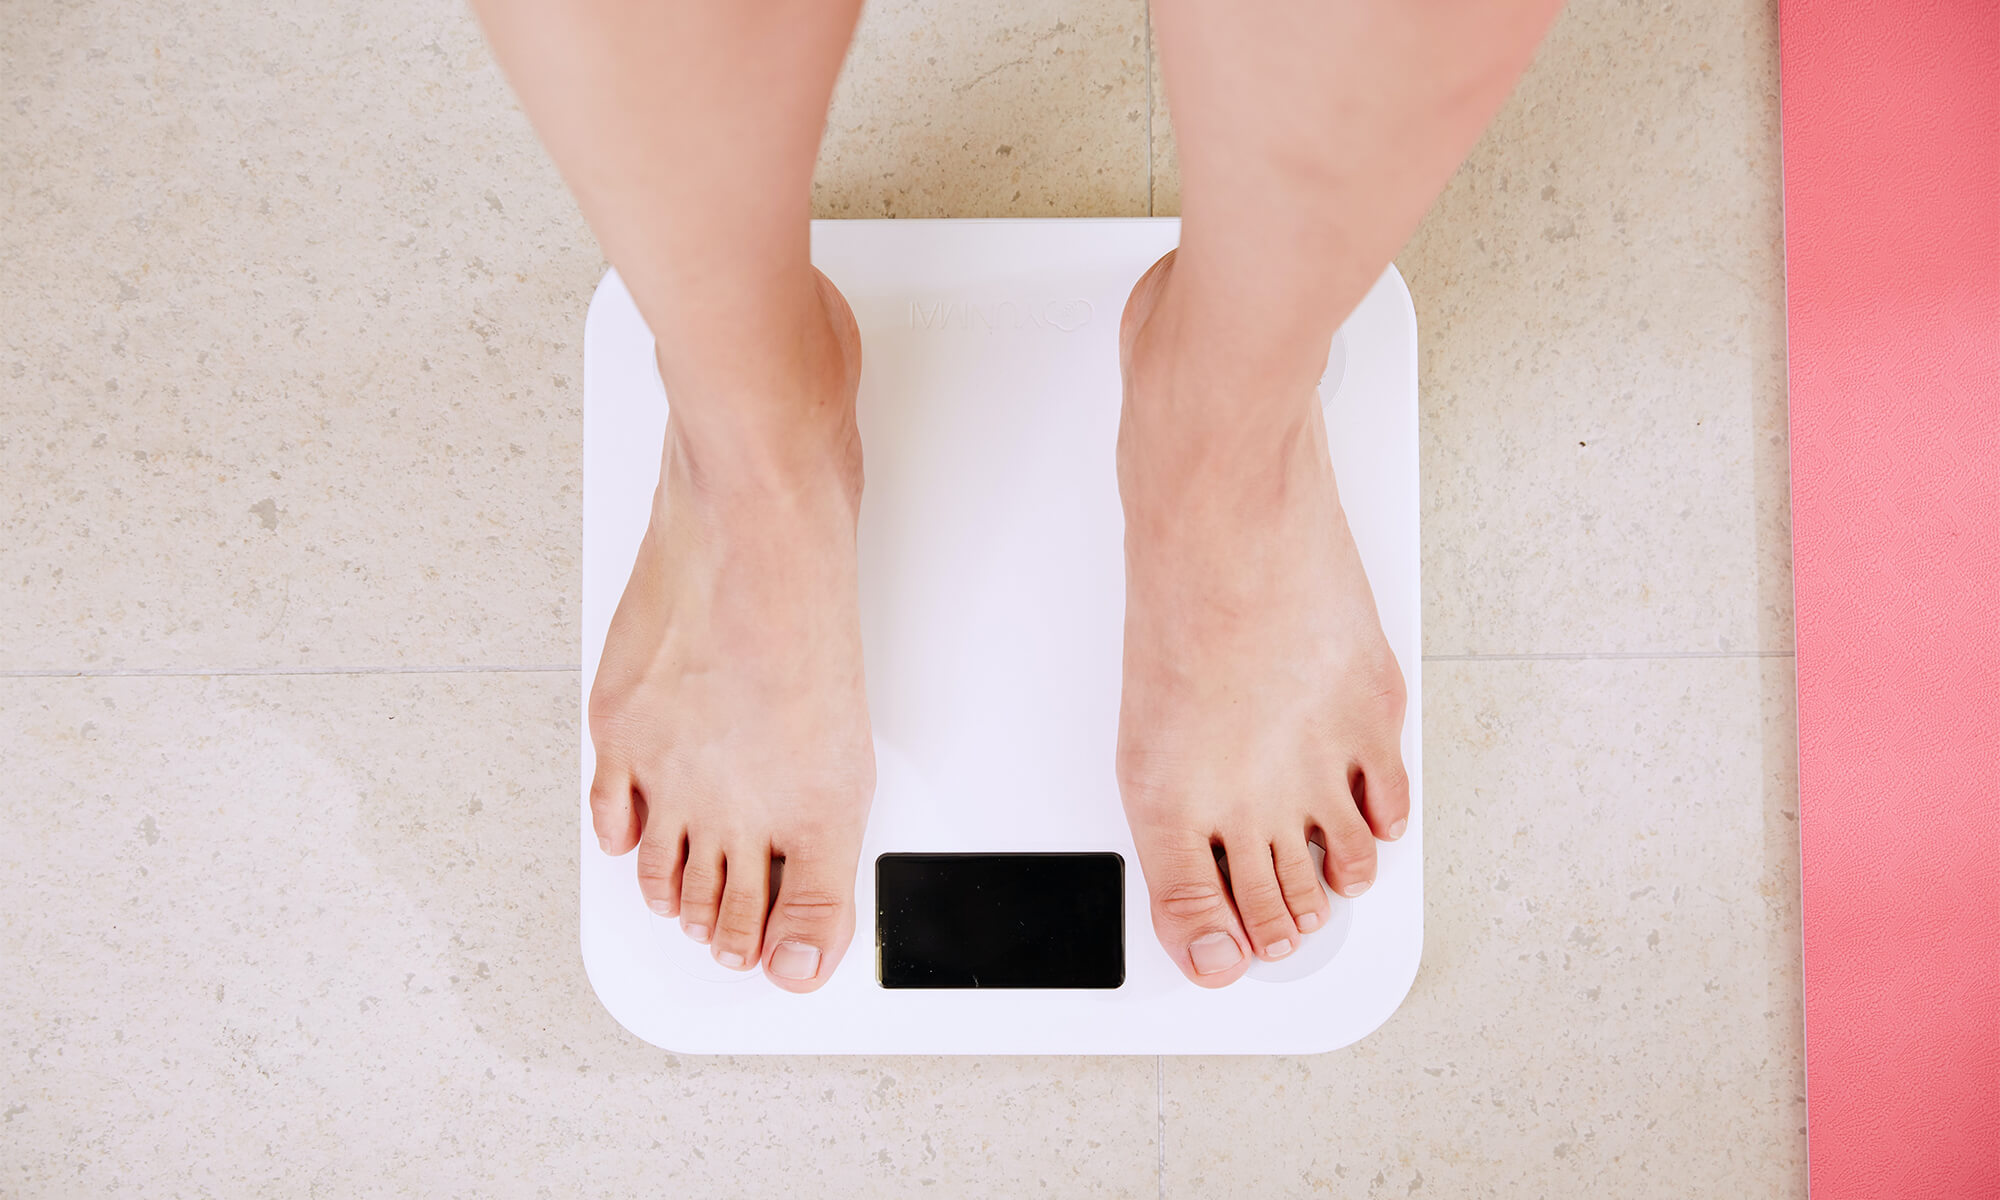 Tips to lose weight: 15 kilograms in one year